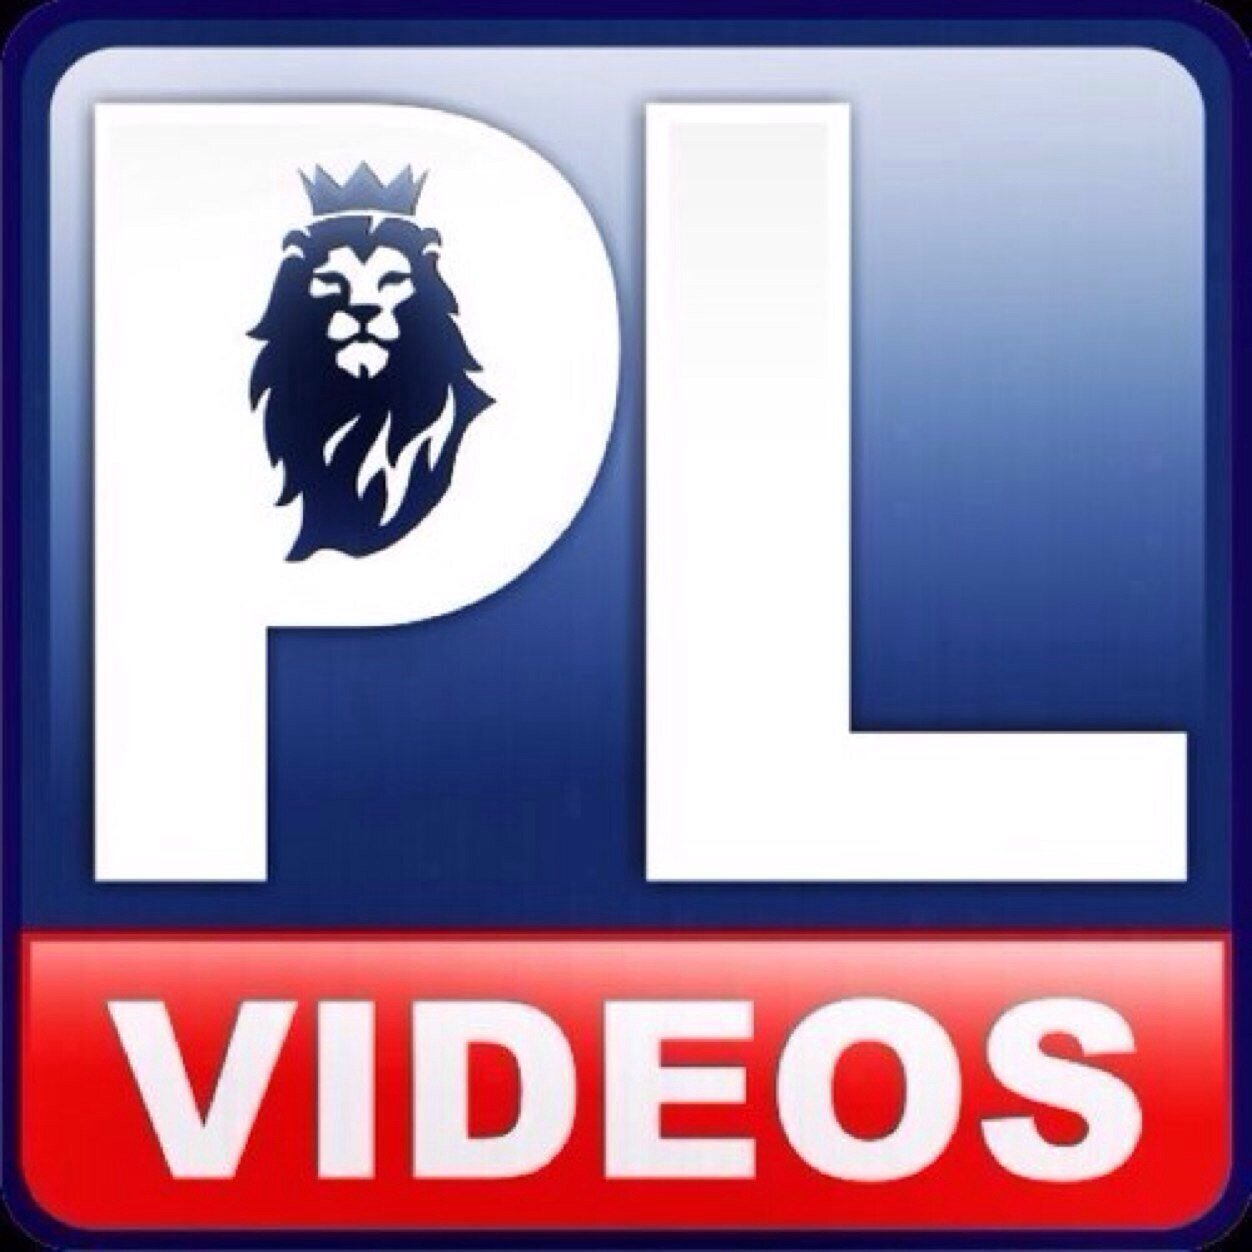 We provide live streaming links to all Premier League and Champions League games | Highlights | Live goals. (Not associated with the Premier League or UEFA)